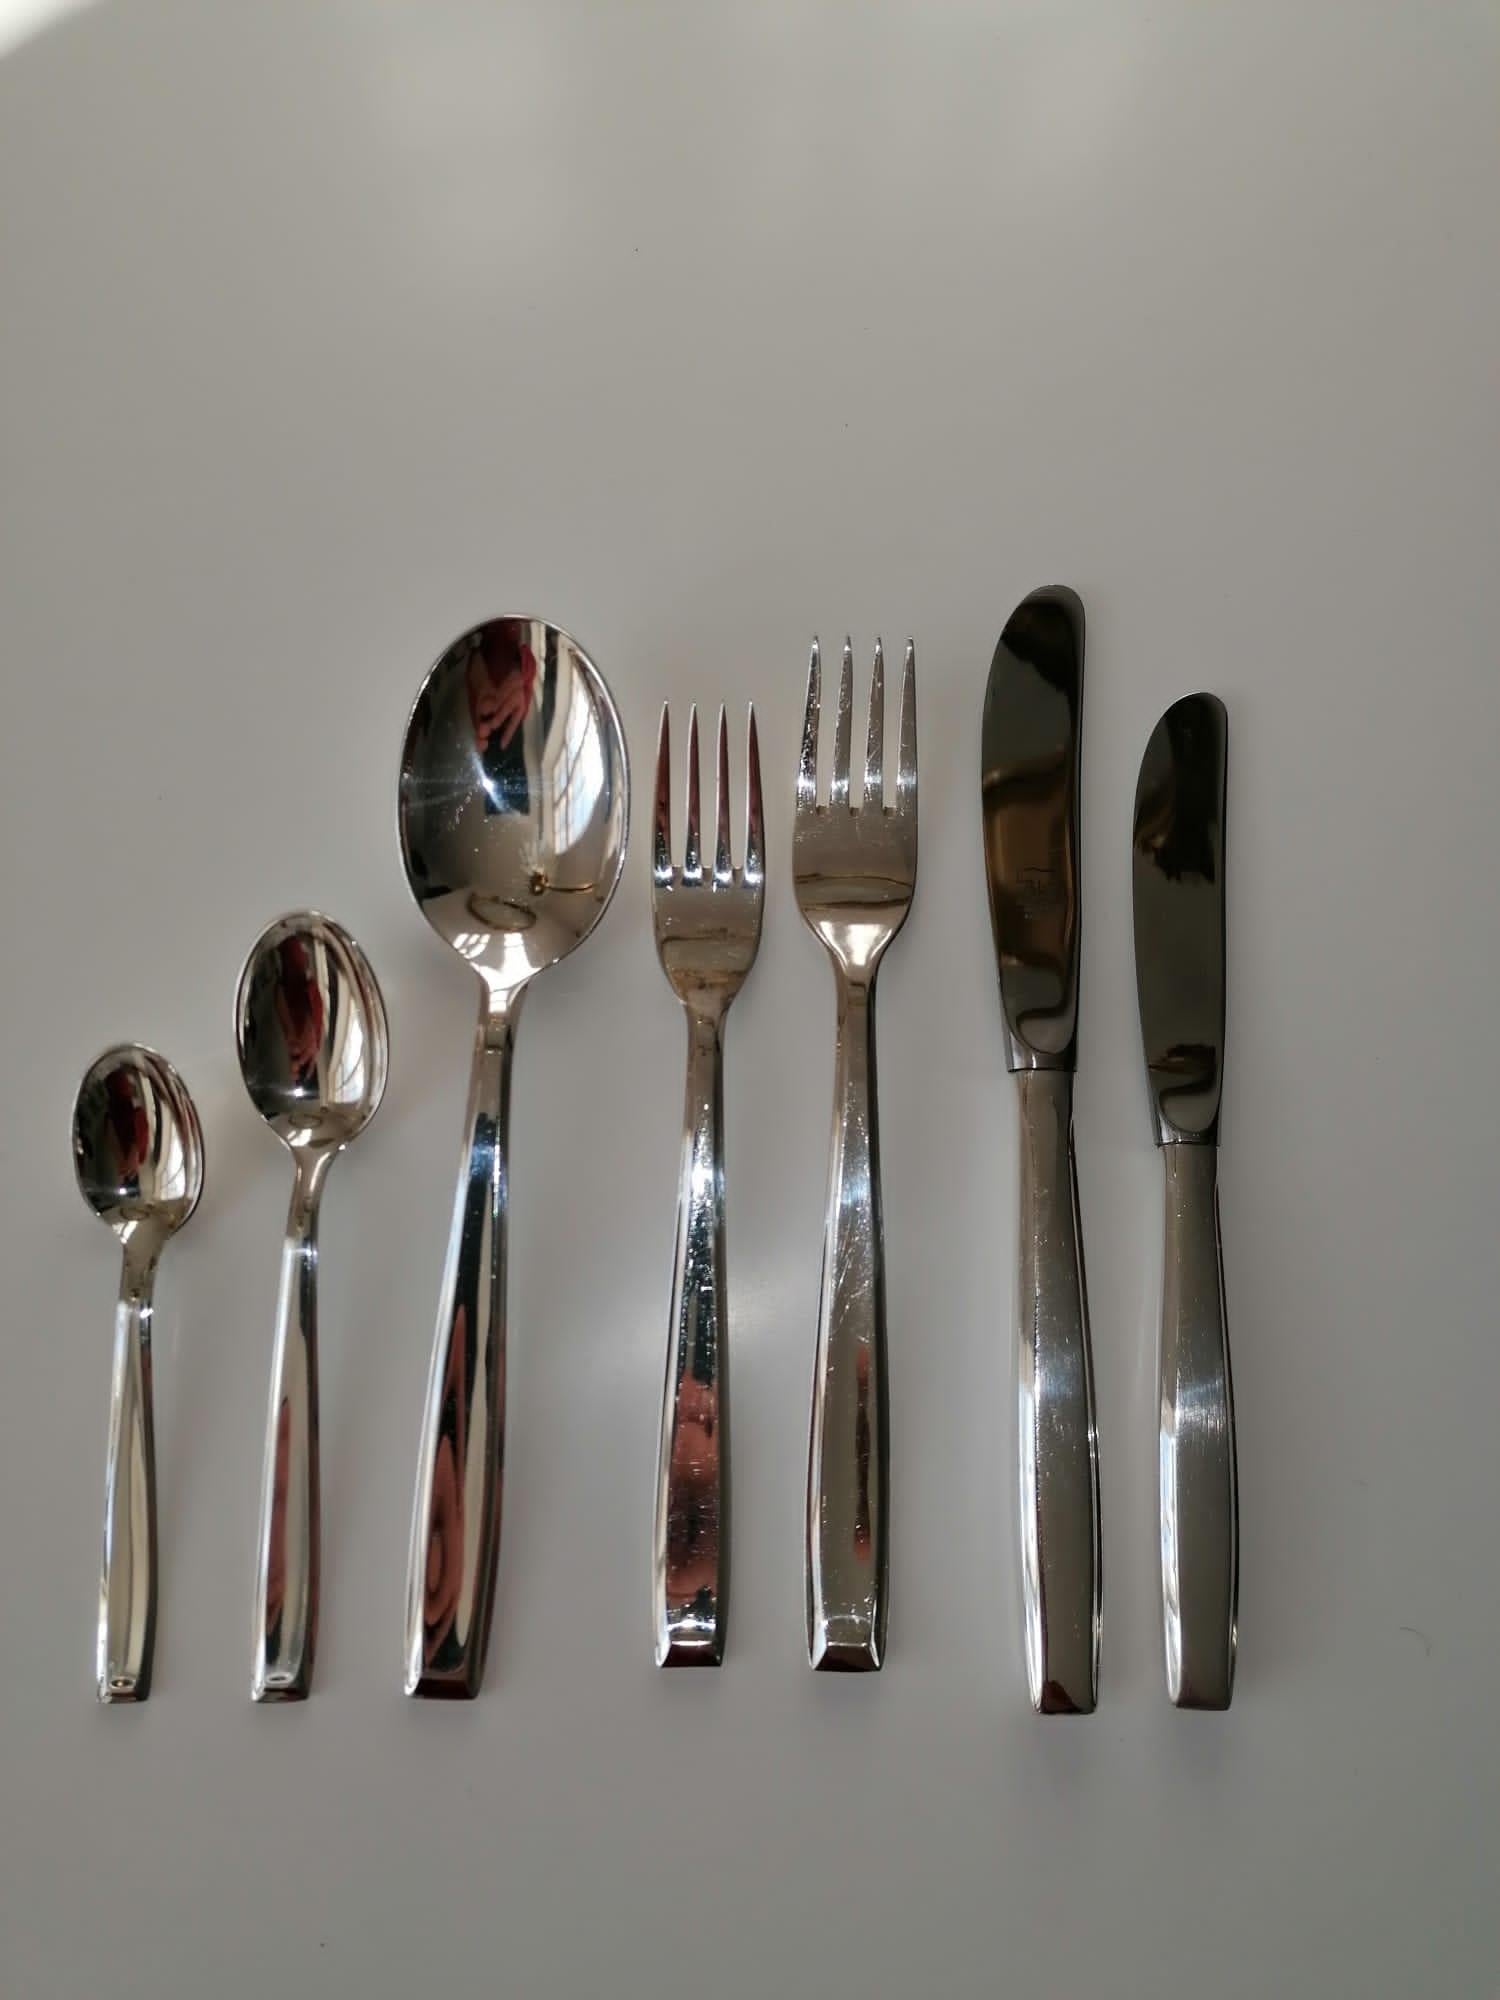 Austrian high-quality flatware silver plated by Berndorf, former Krupp Company from the 1960s. The cutlery has a handle with a very interesting geometric decor. Used but in excellent condition, some in near new condition. Designed by Philipp